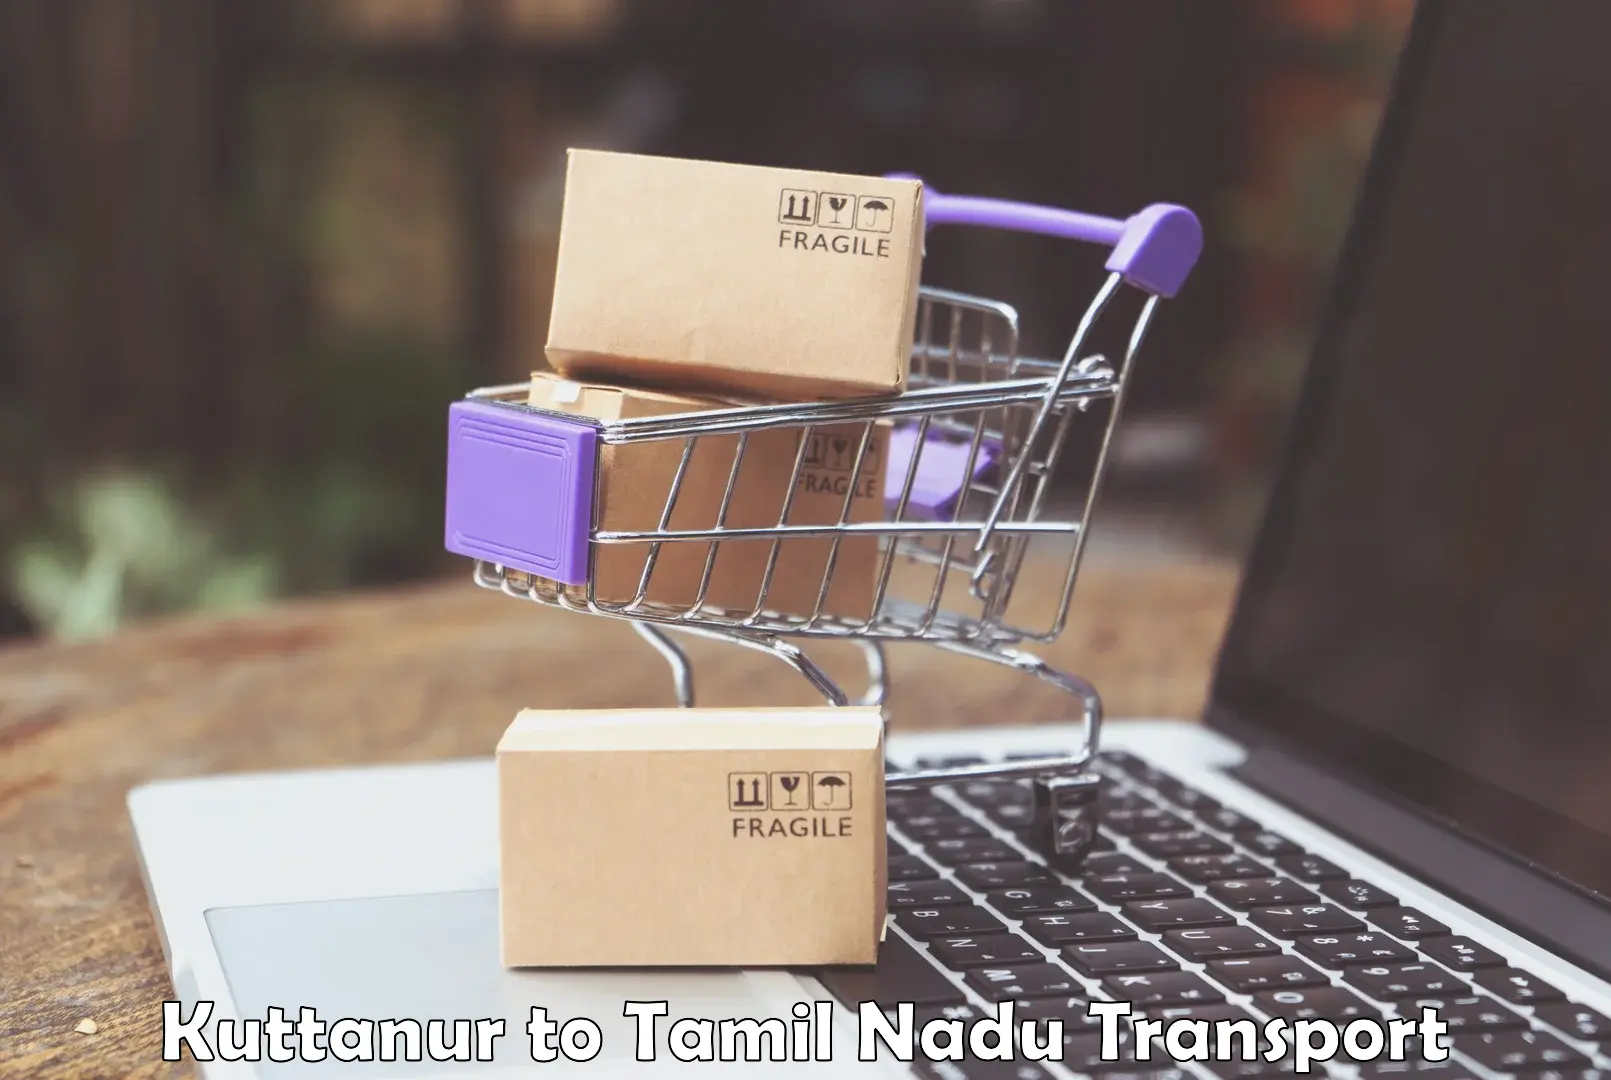 Online transport booking Kuttanur to Peralam